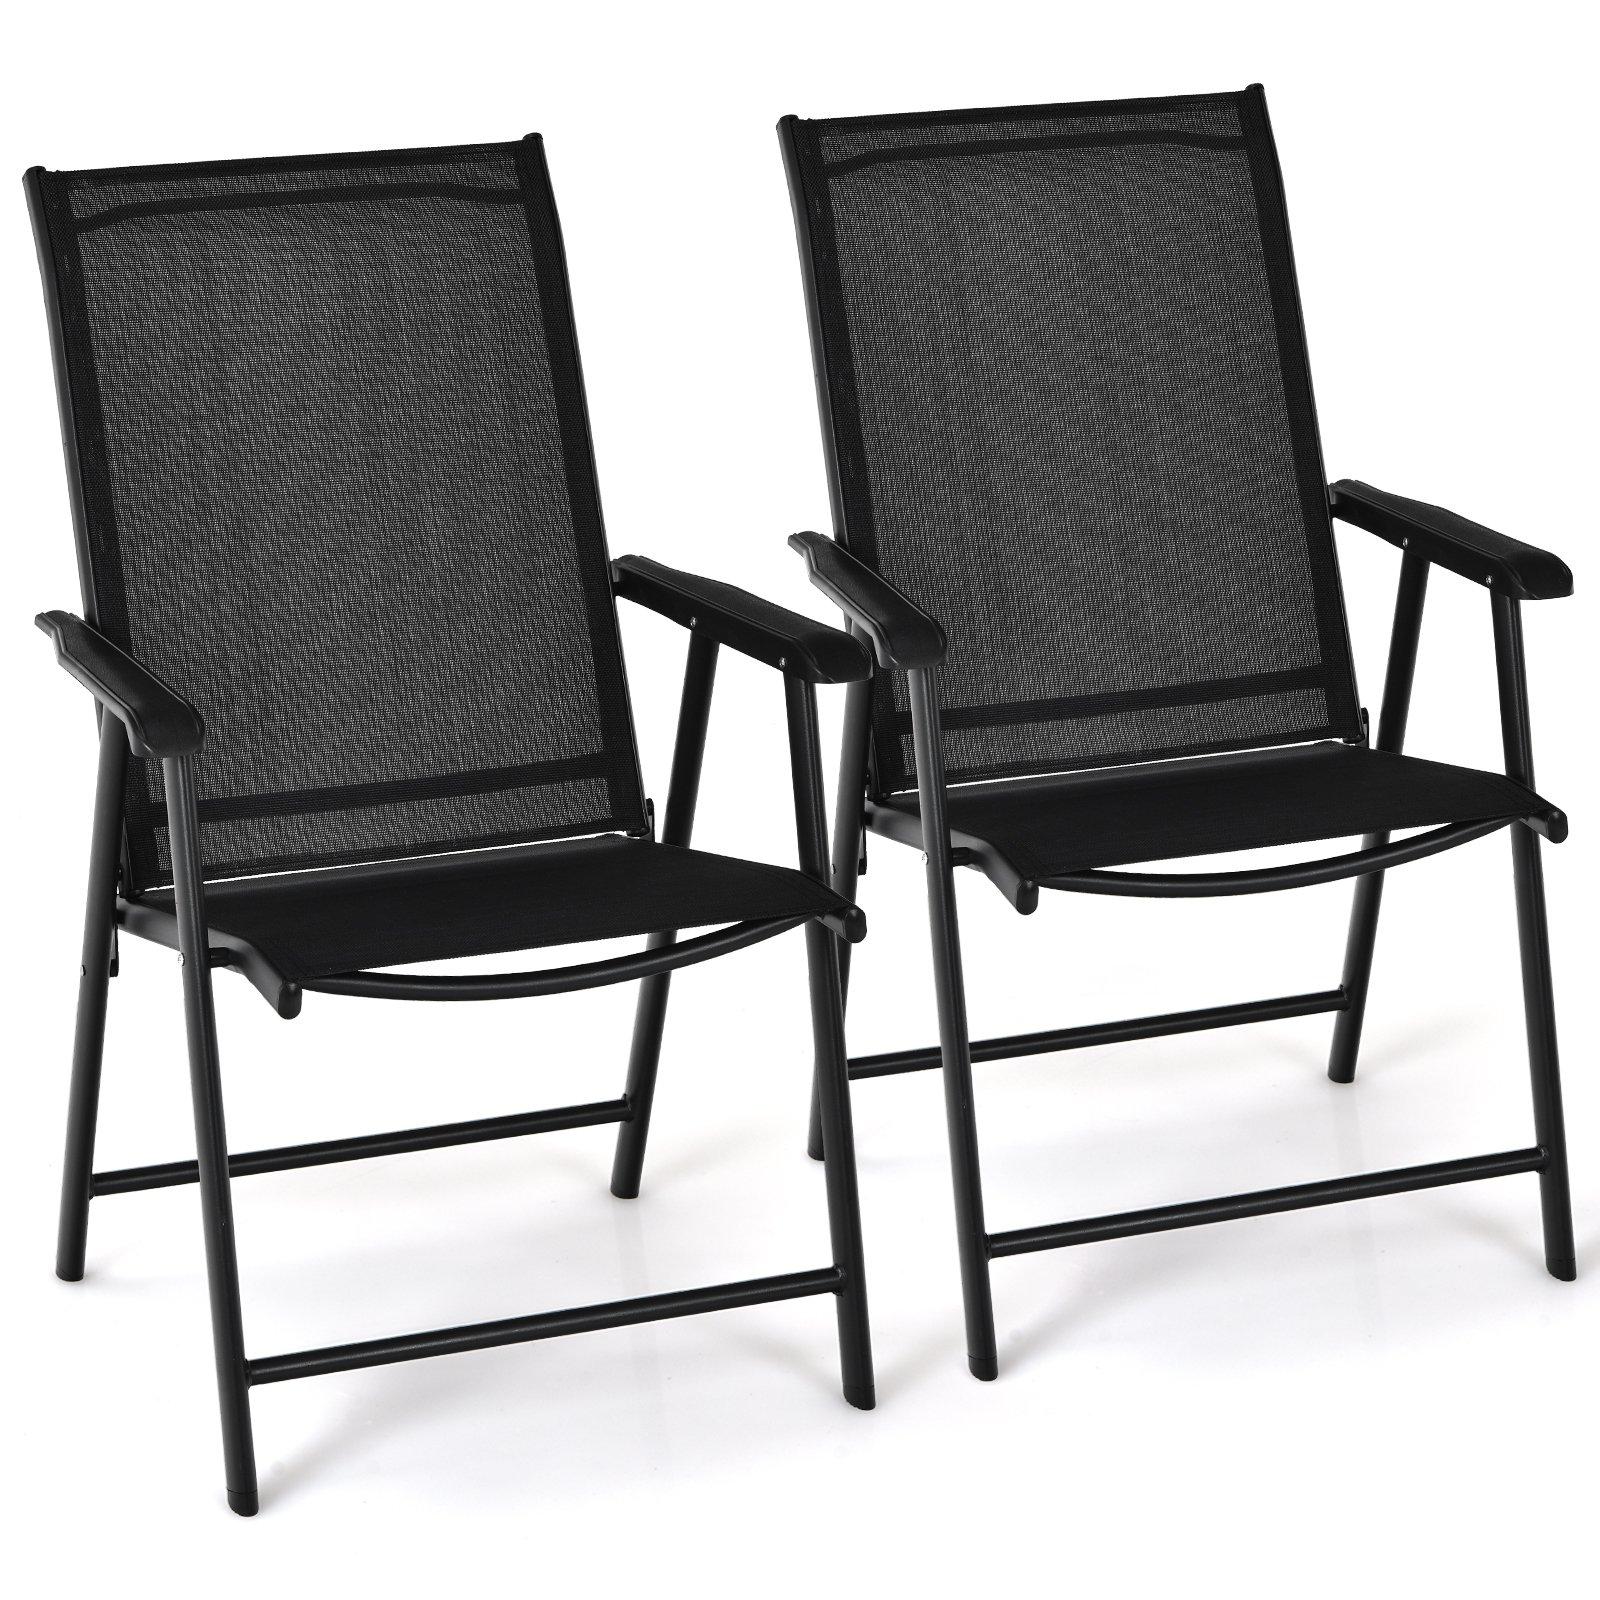 Set of 2 Folding Chairs Outdoor Dining Garden Chairs Armchair with Armrests